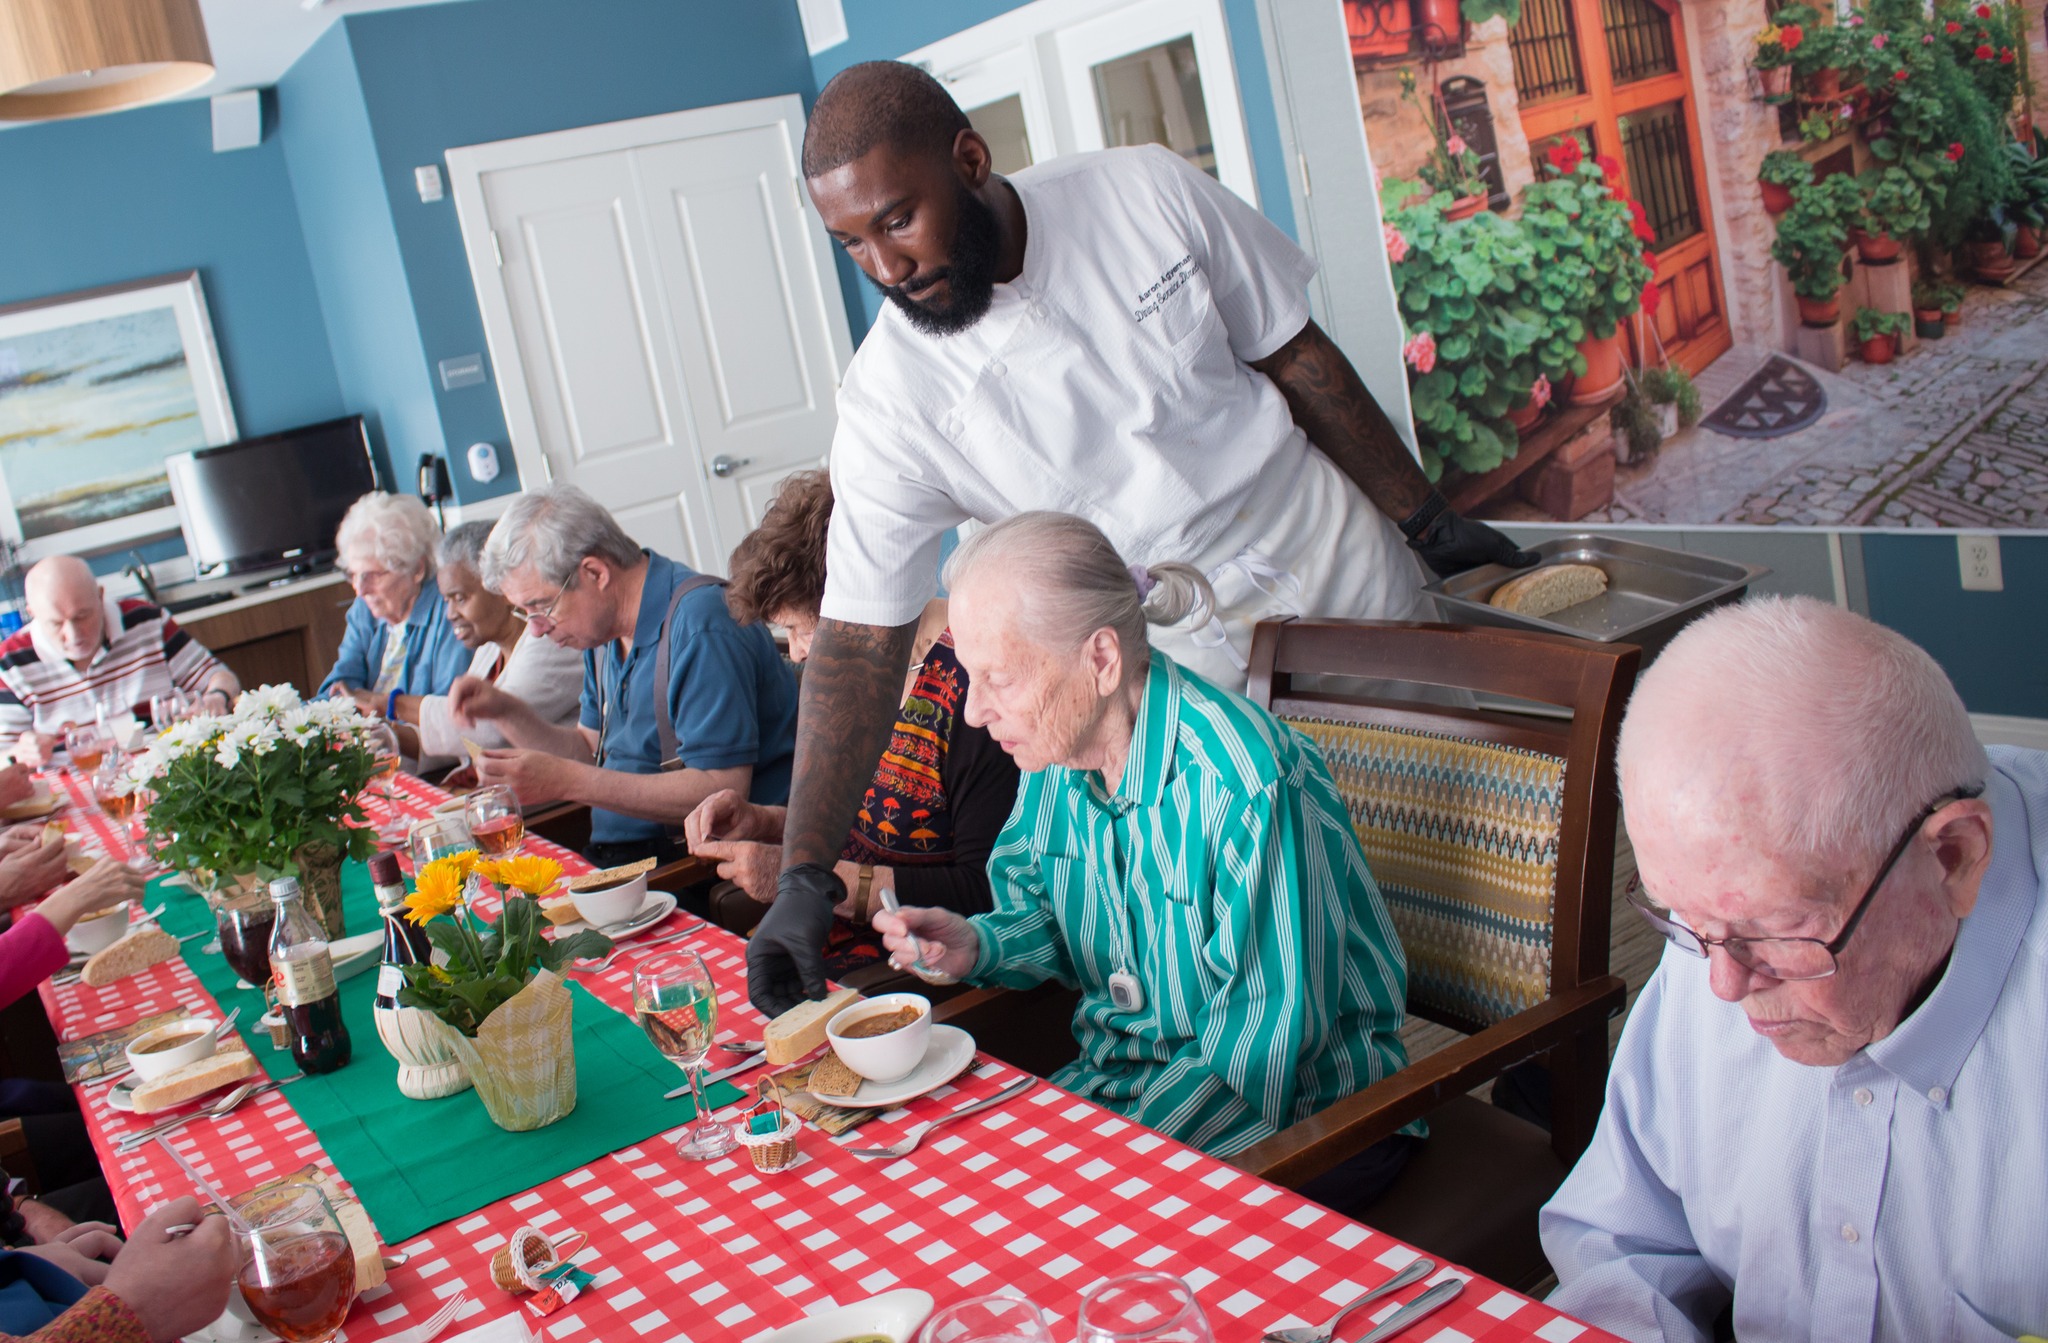 Brightview Senior Living Jobs and Assisted Living Jobs